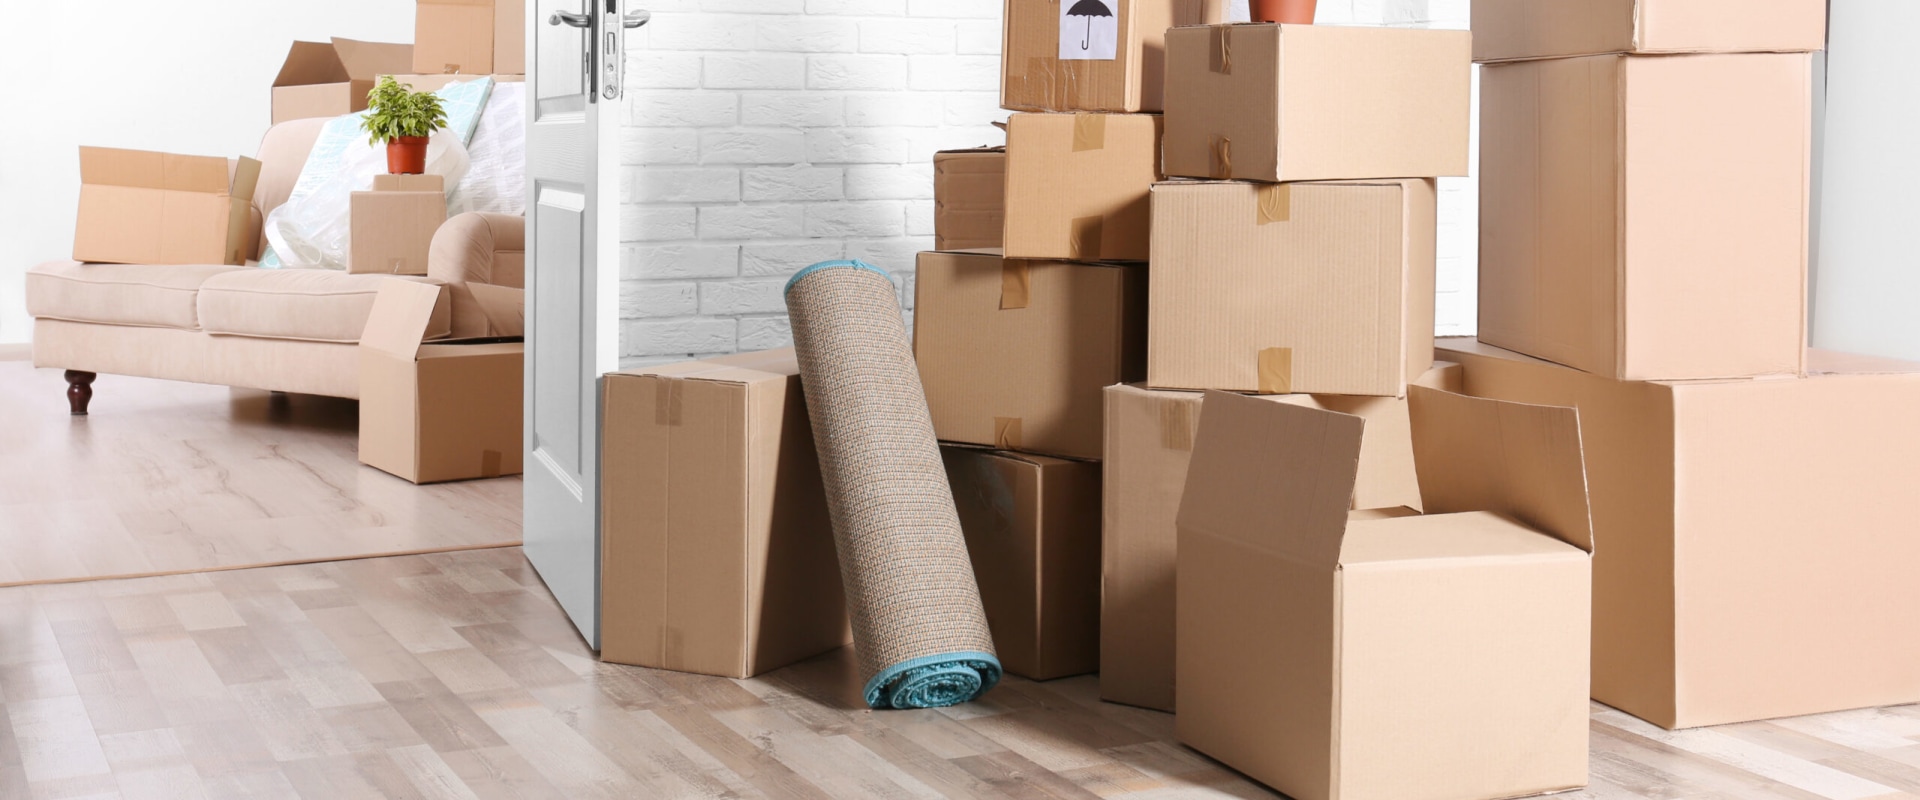 Expert Tips for a Smooth Move with Moving Companies in Broward County, FL